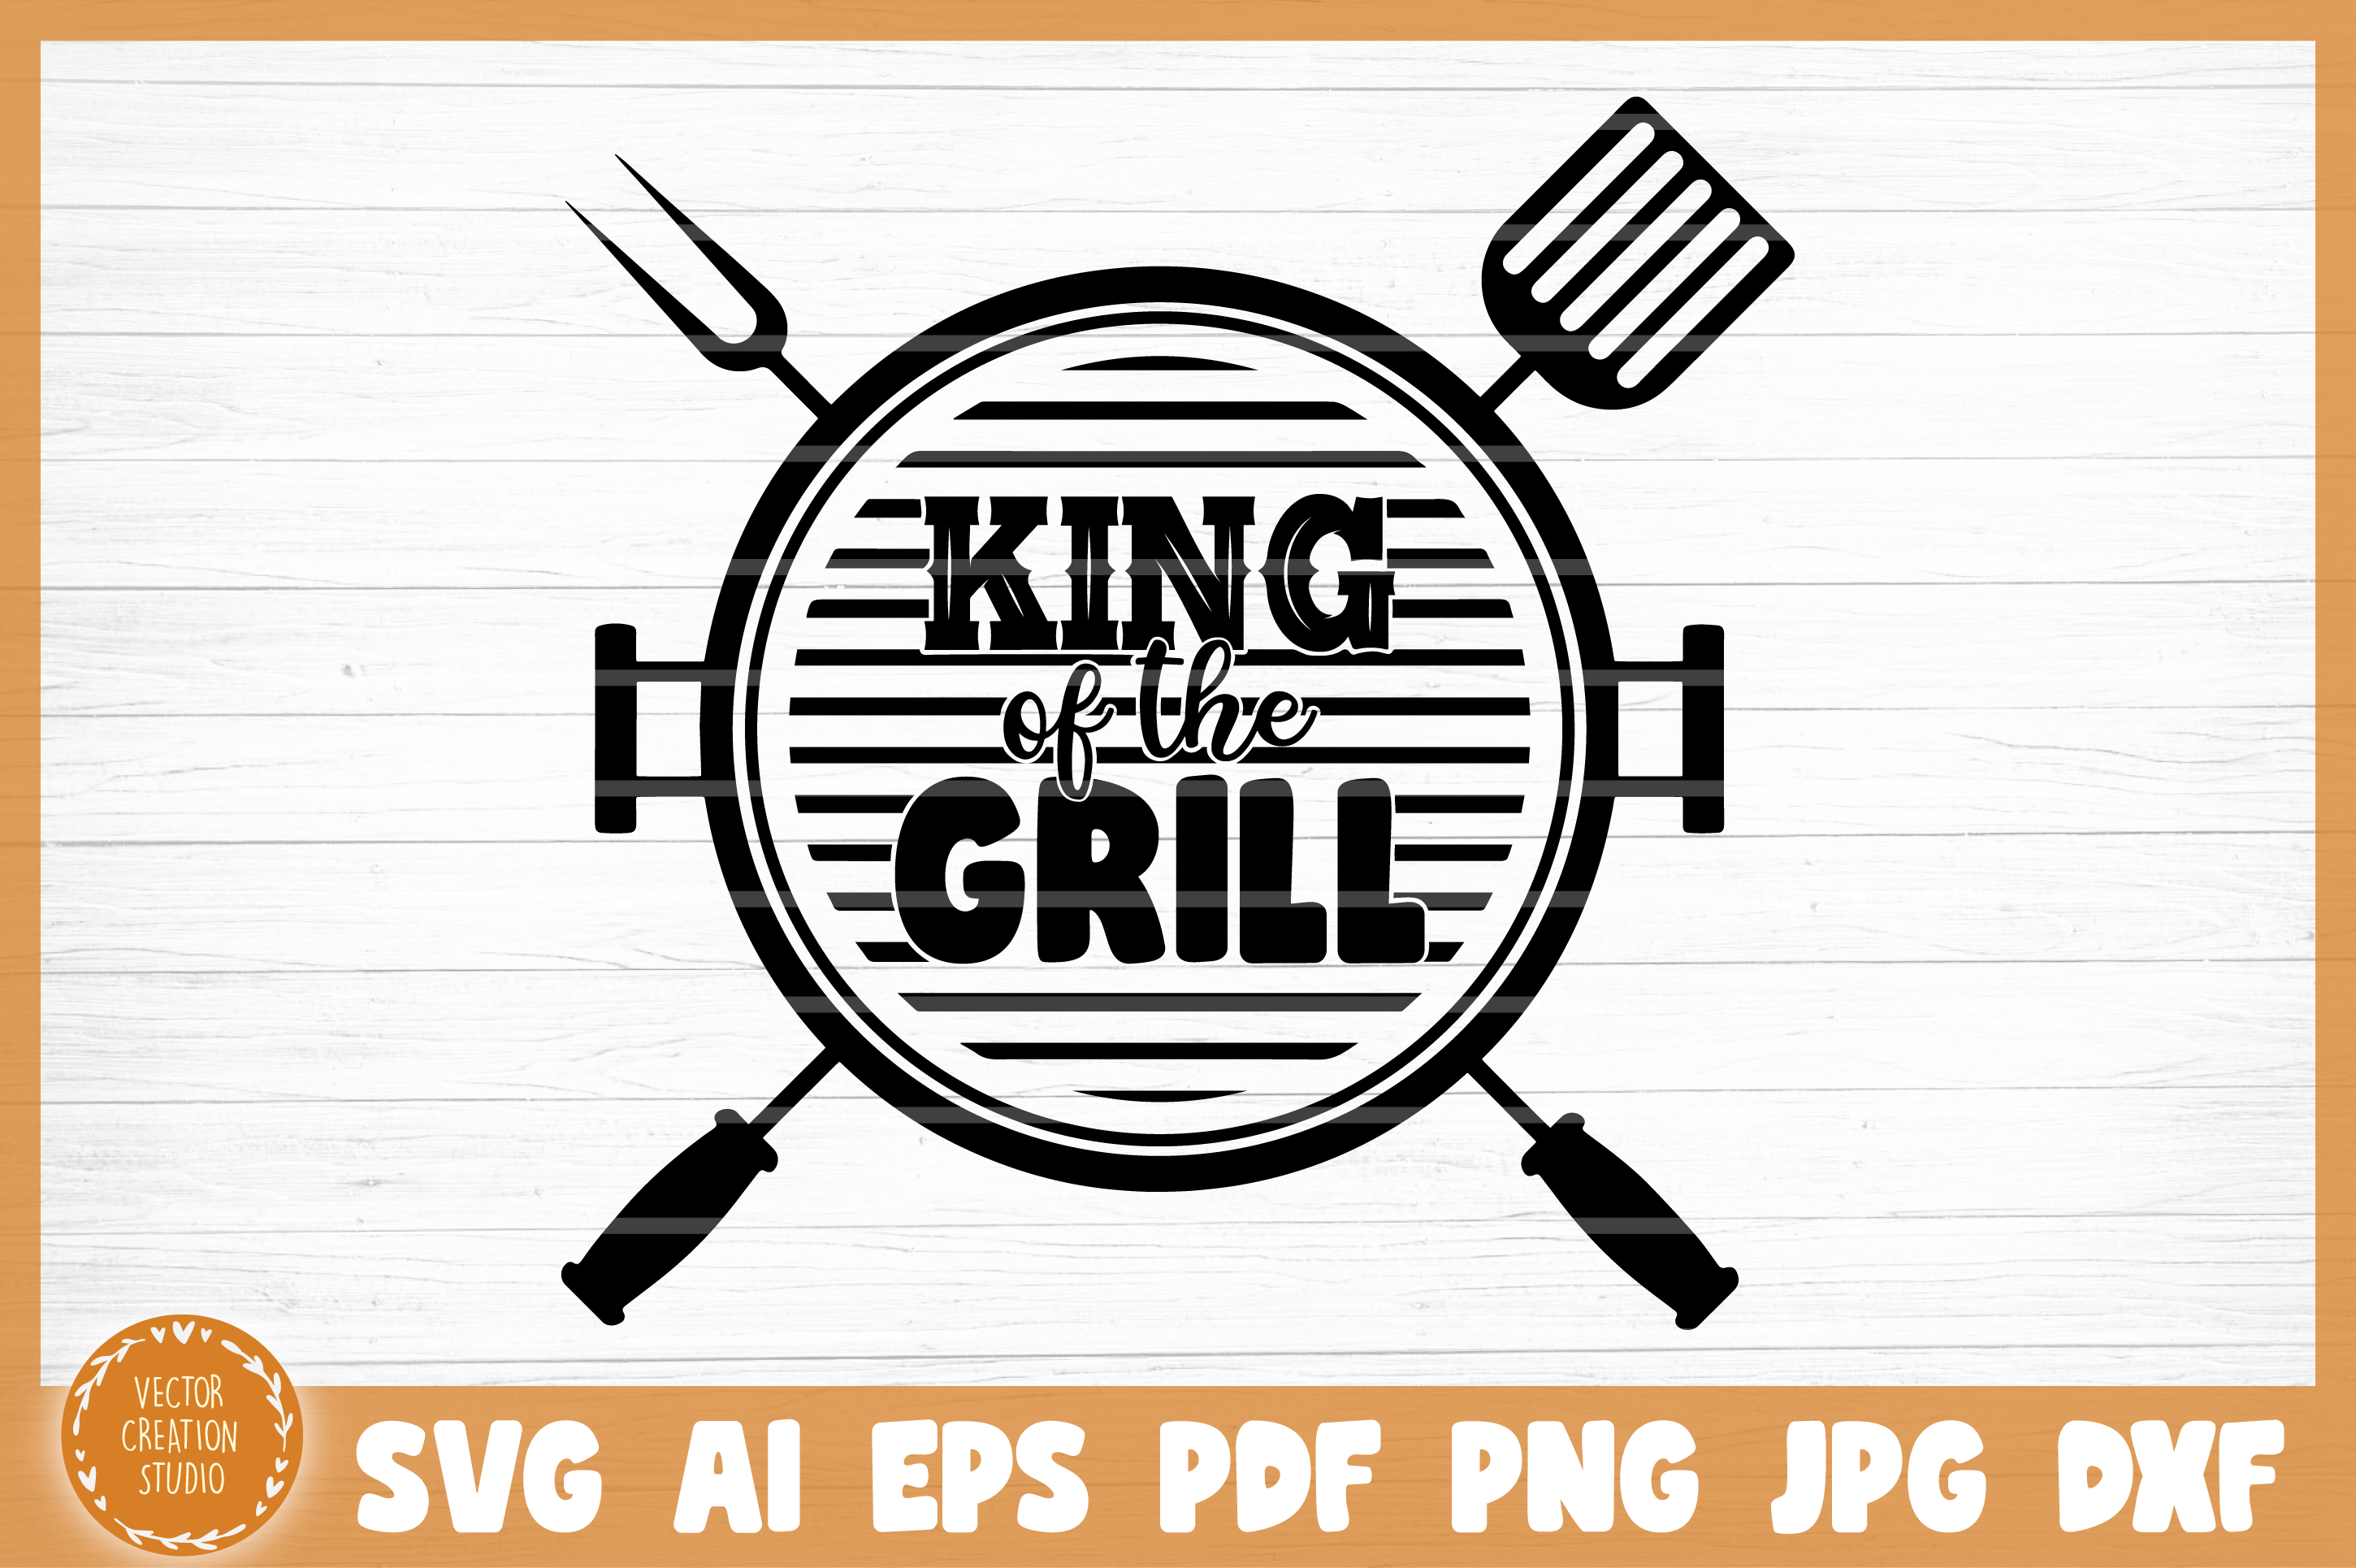 Download King Of The Grill Bbq Svg Cut File By Vectorcreationstudio Thehungryjpeg Com